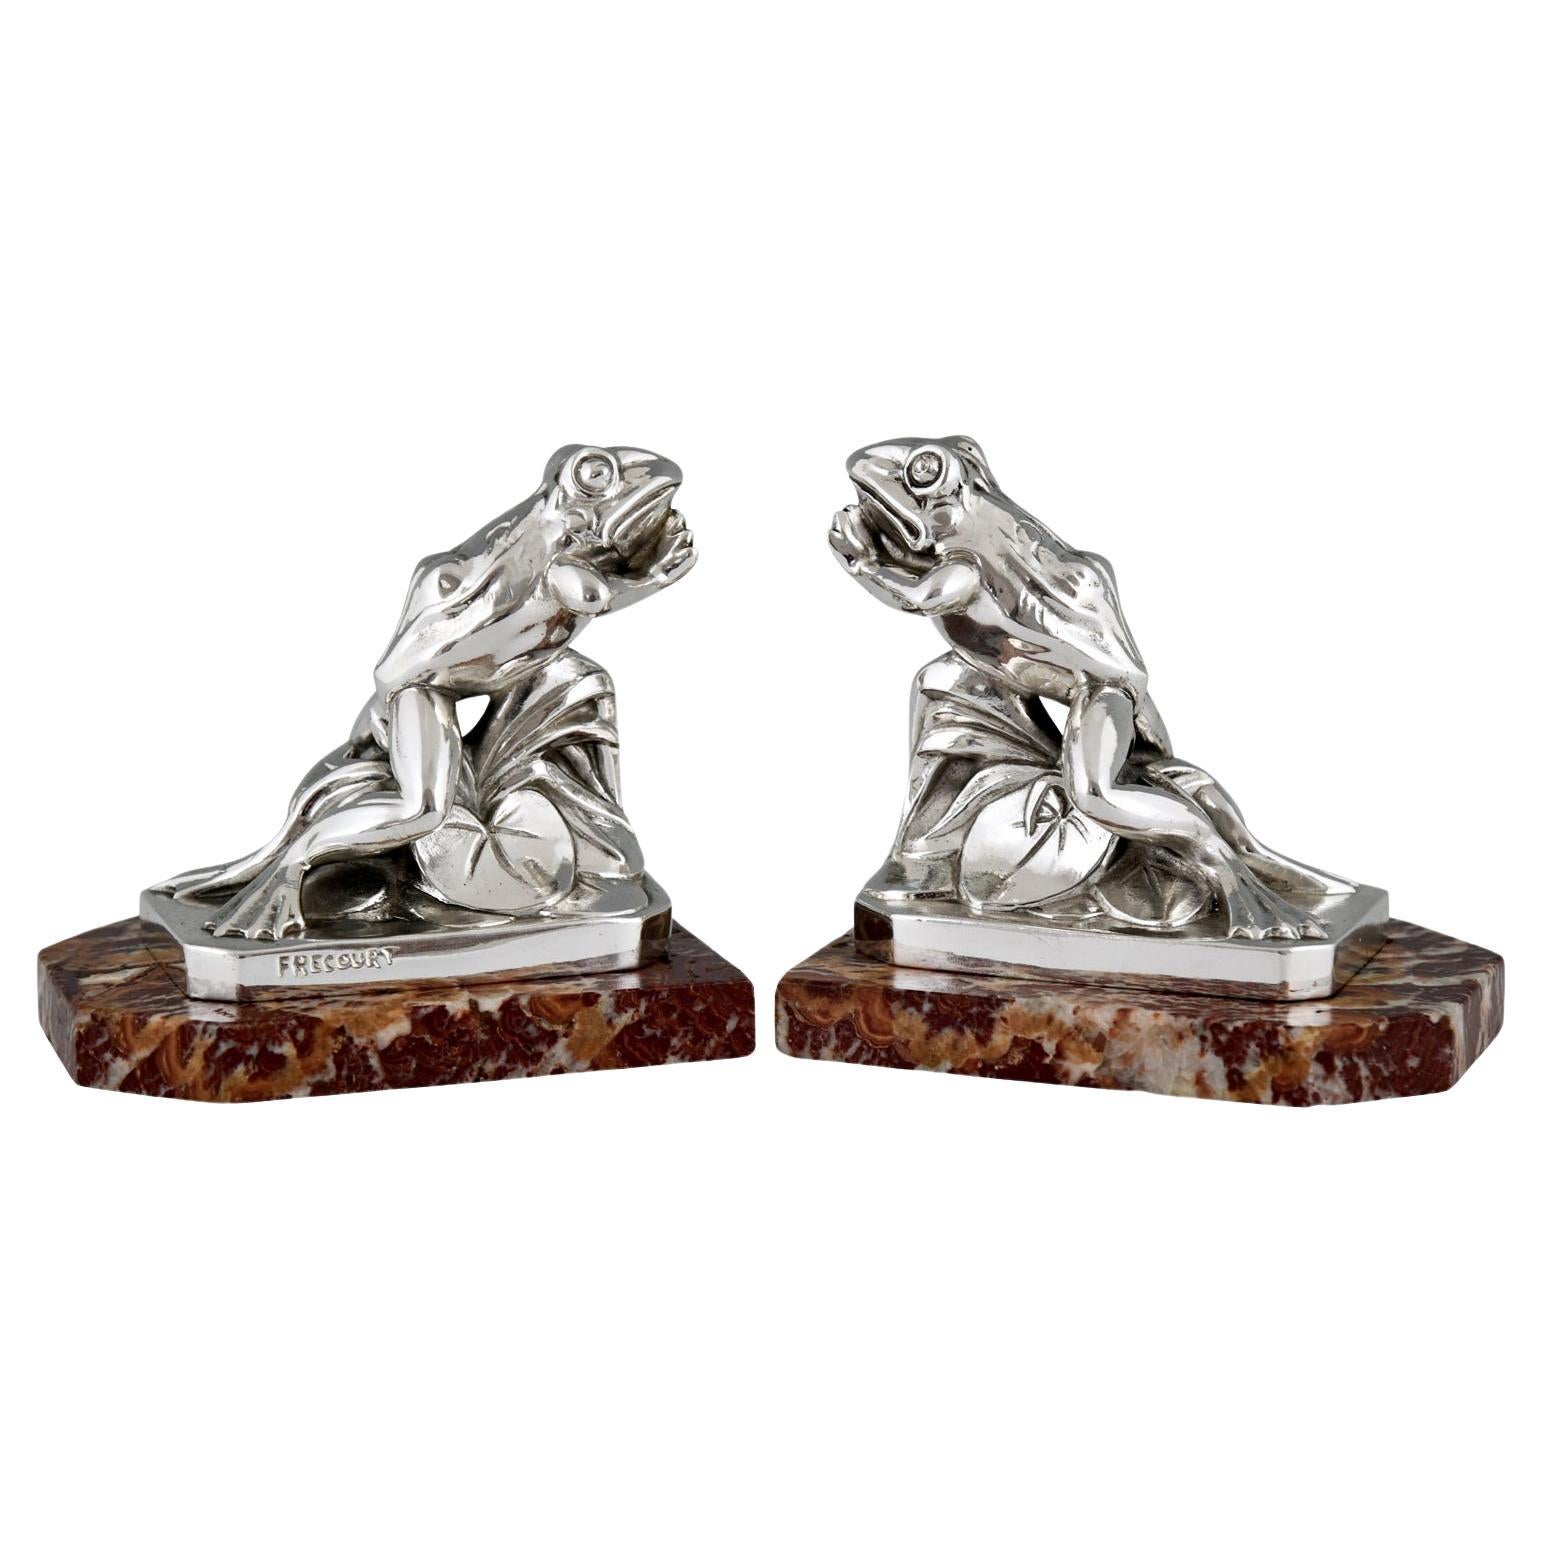 Art Deco silvered frog bookends by Maurice Frecourt.